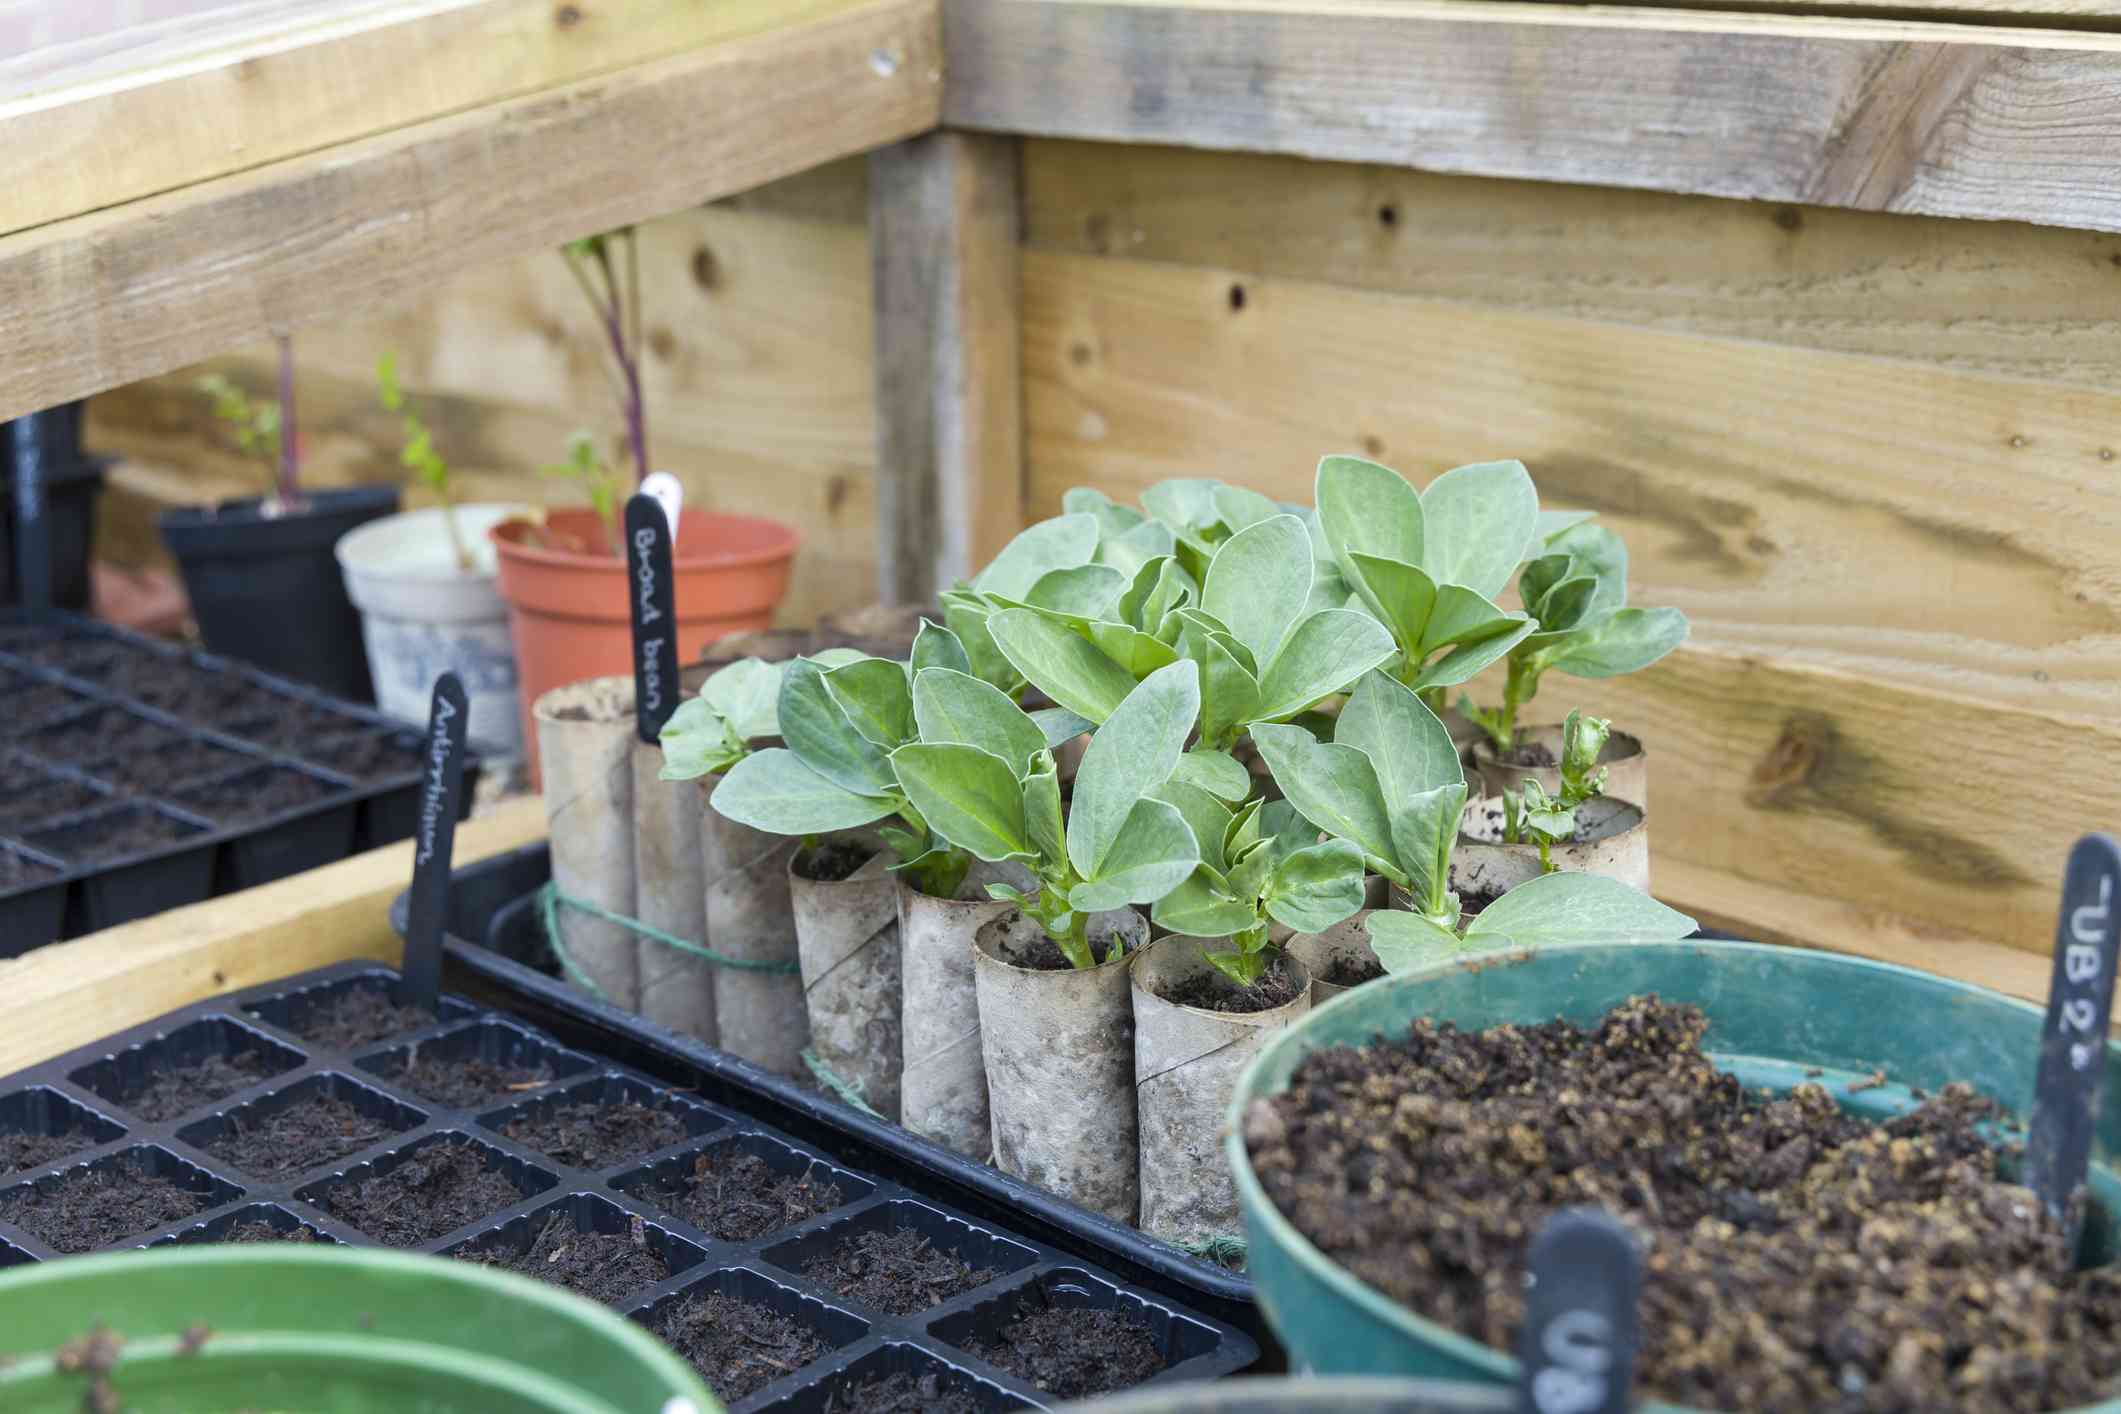 Seedlings and seed starting equipment in a cold frame